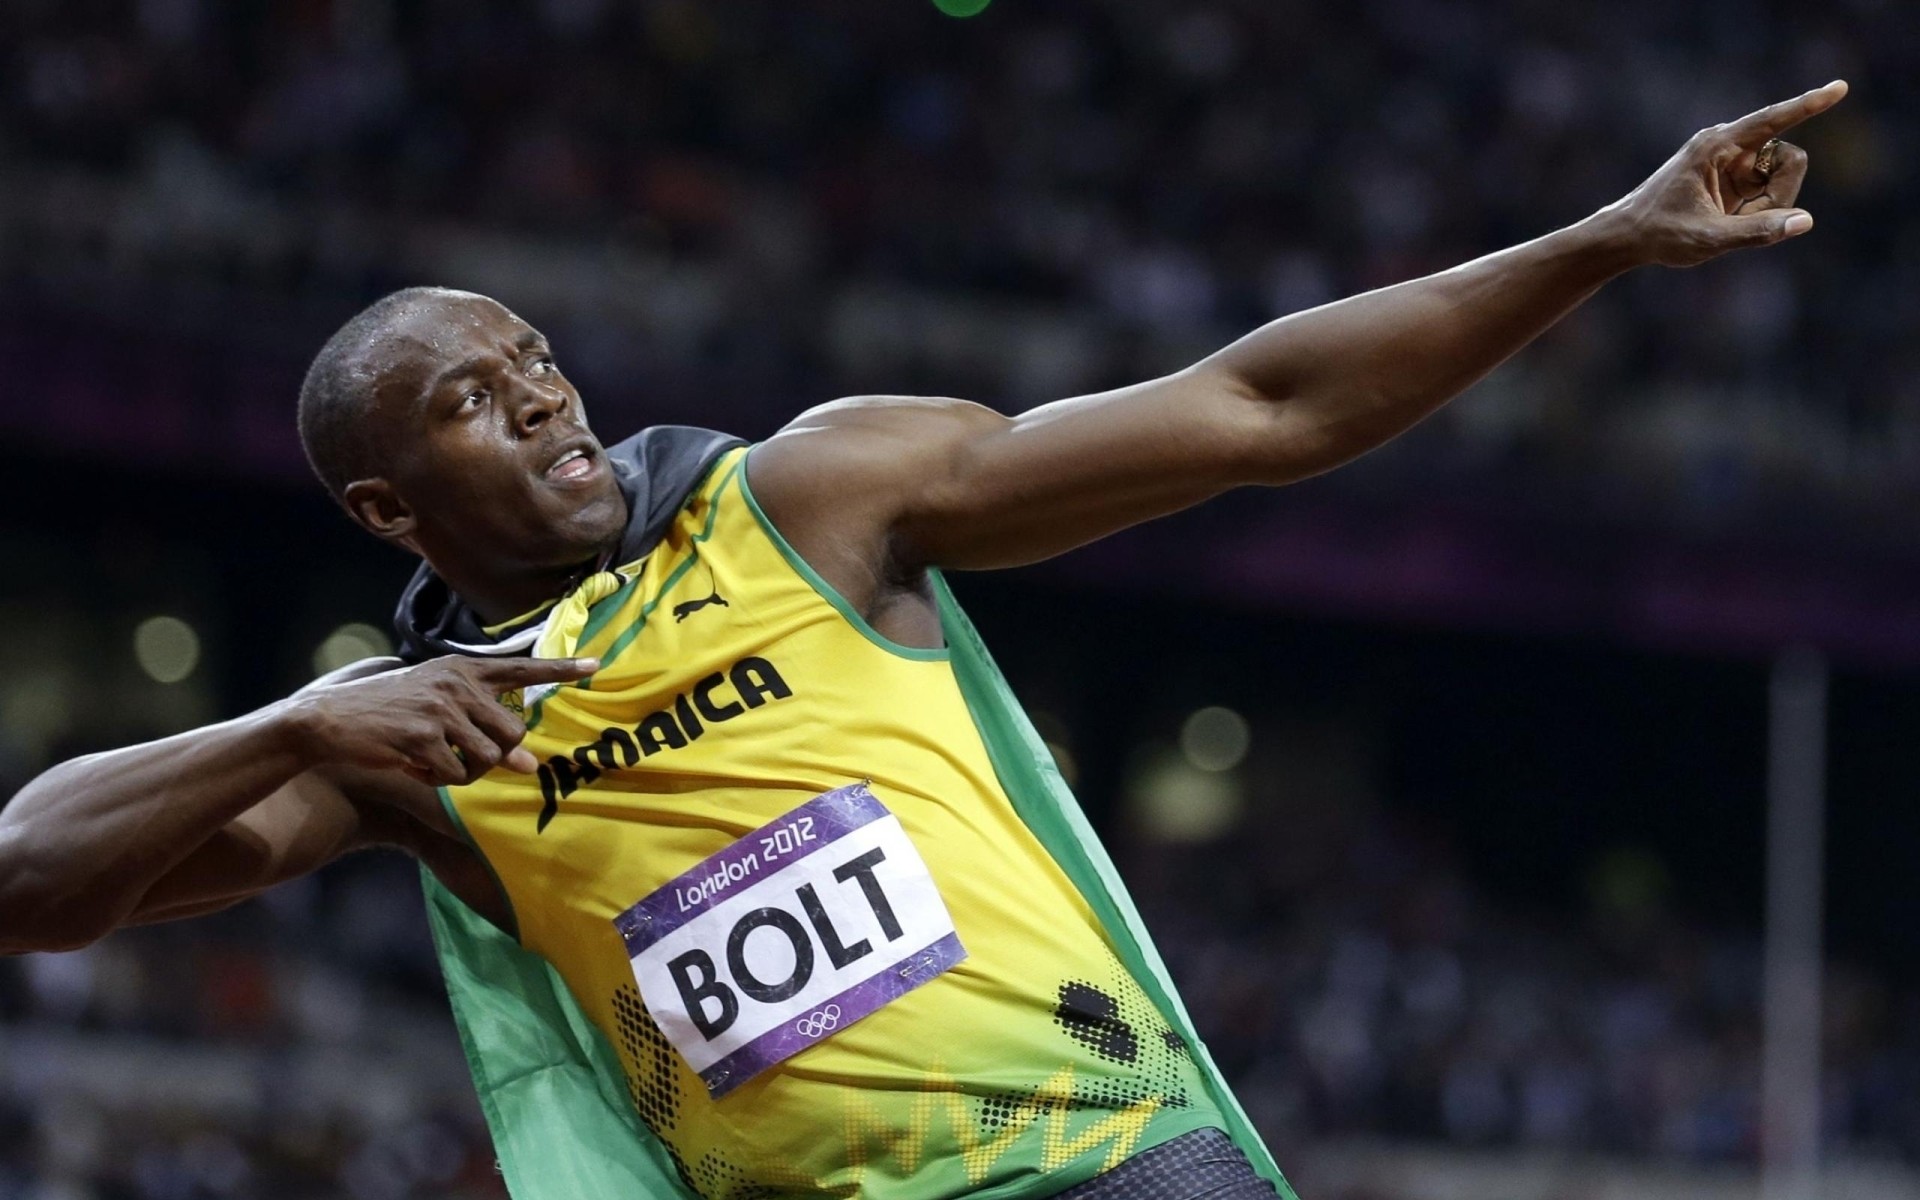 1920x1200 Usain Bolt - Wallpapers-HD Wallpapers-Laptop Wallpapers